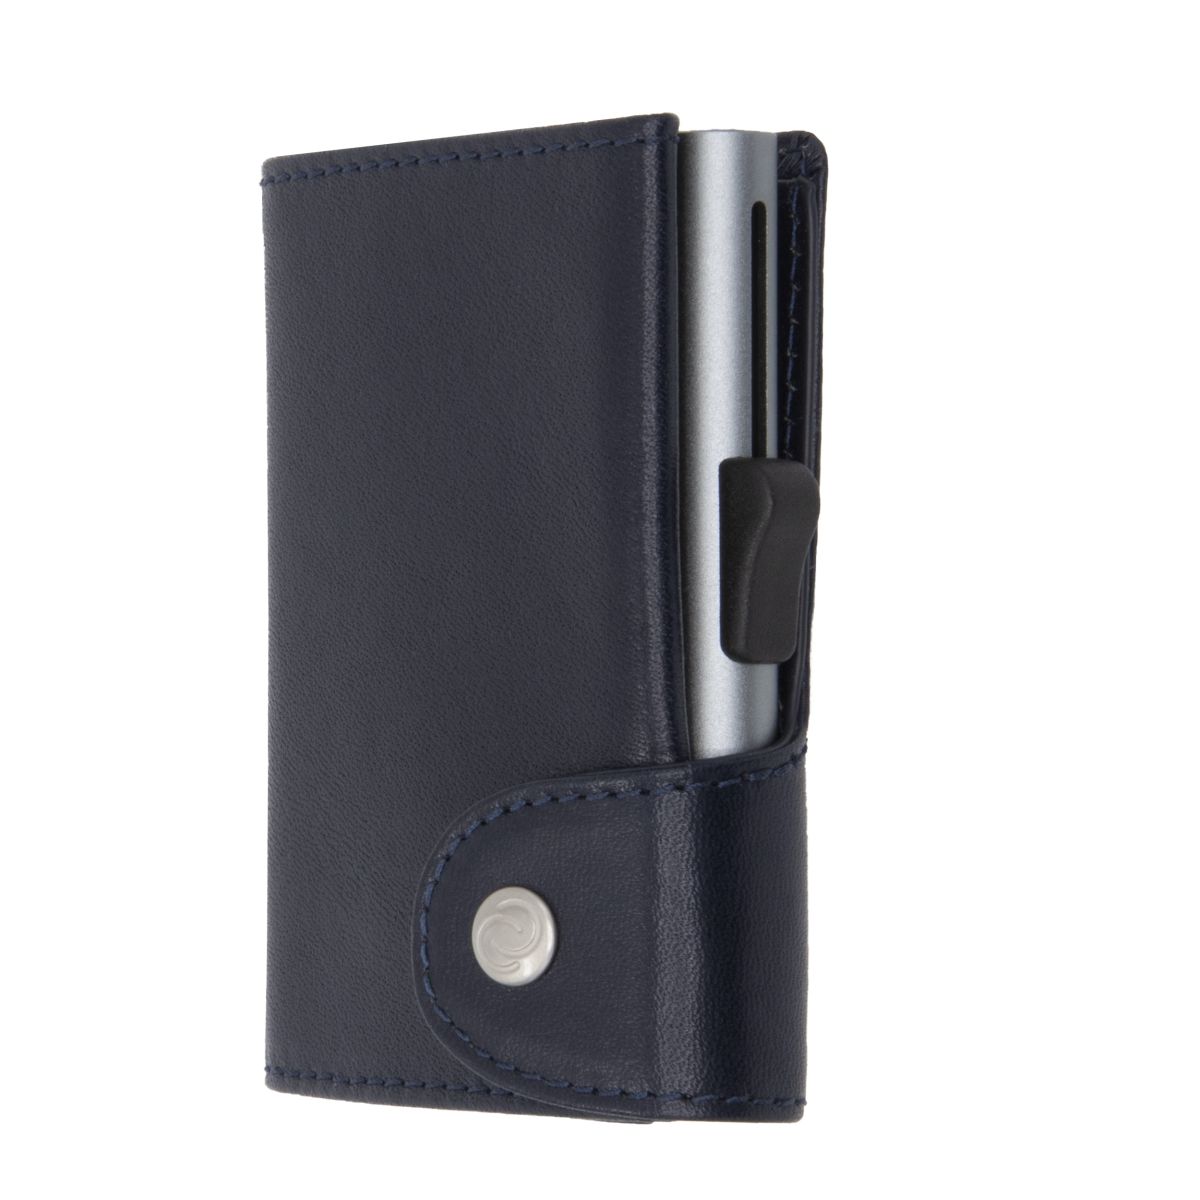 C-Secure XL Aluminum Wallet with Vegetable Genuine Leather - Blue Montana